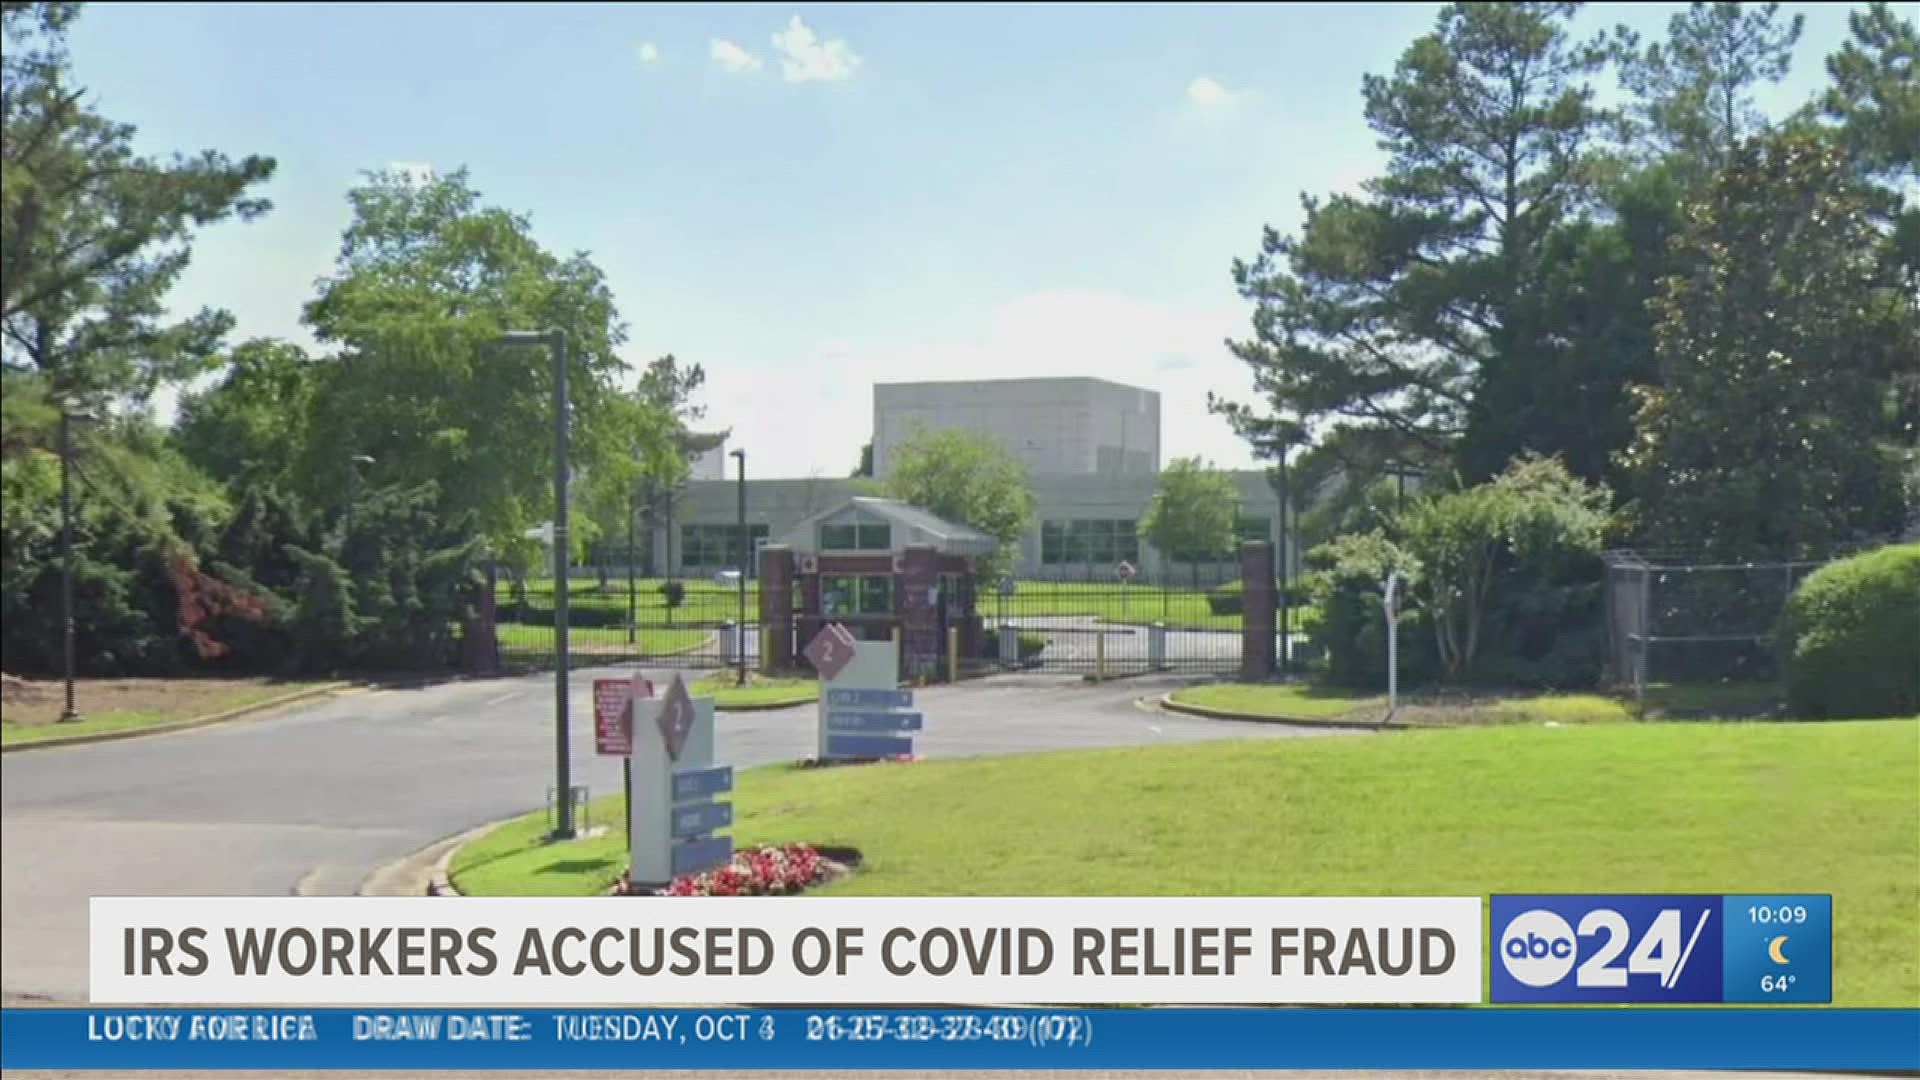 Five current or former Mid-South IRS employees are accused of fraud in relation to COVID relief programs, according to court documents.